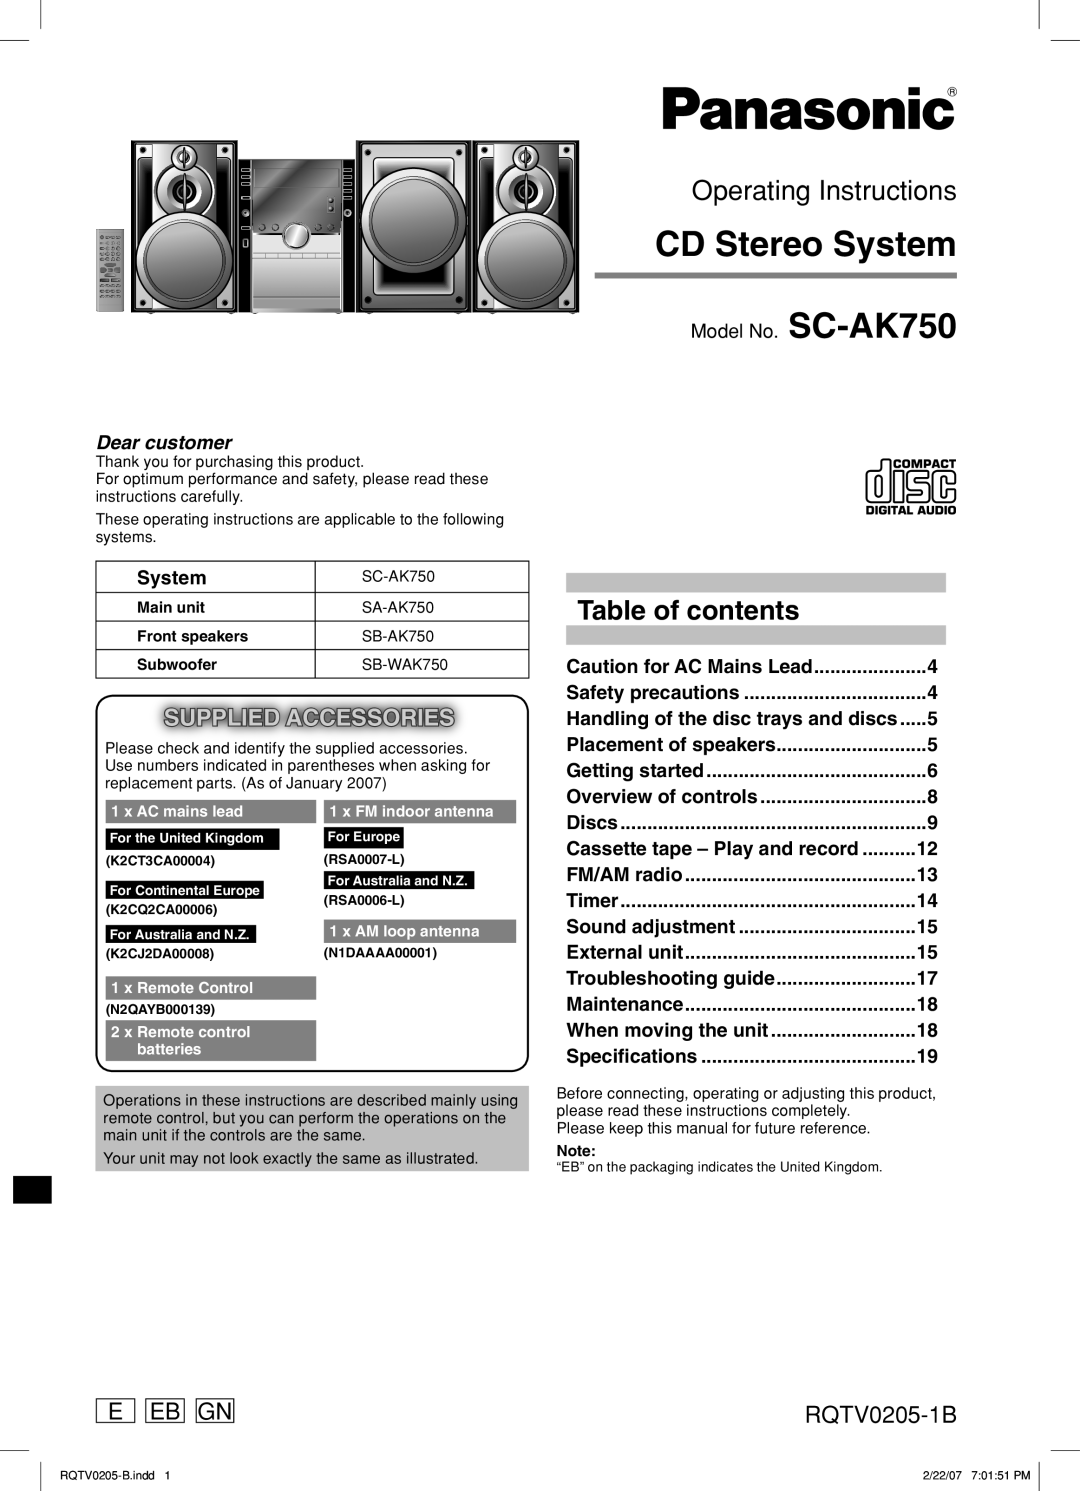 Panasonic Stereo System, 377 operating instructions P Pc, RQTV0200-1P, Model No. SC-AK750, Important Safety Instructions 